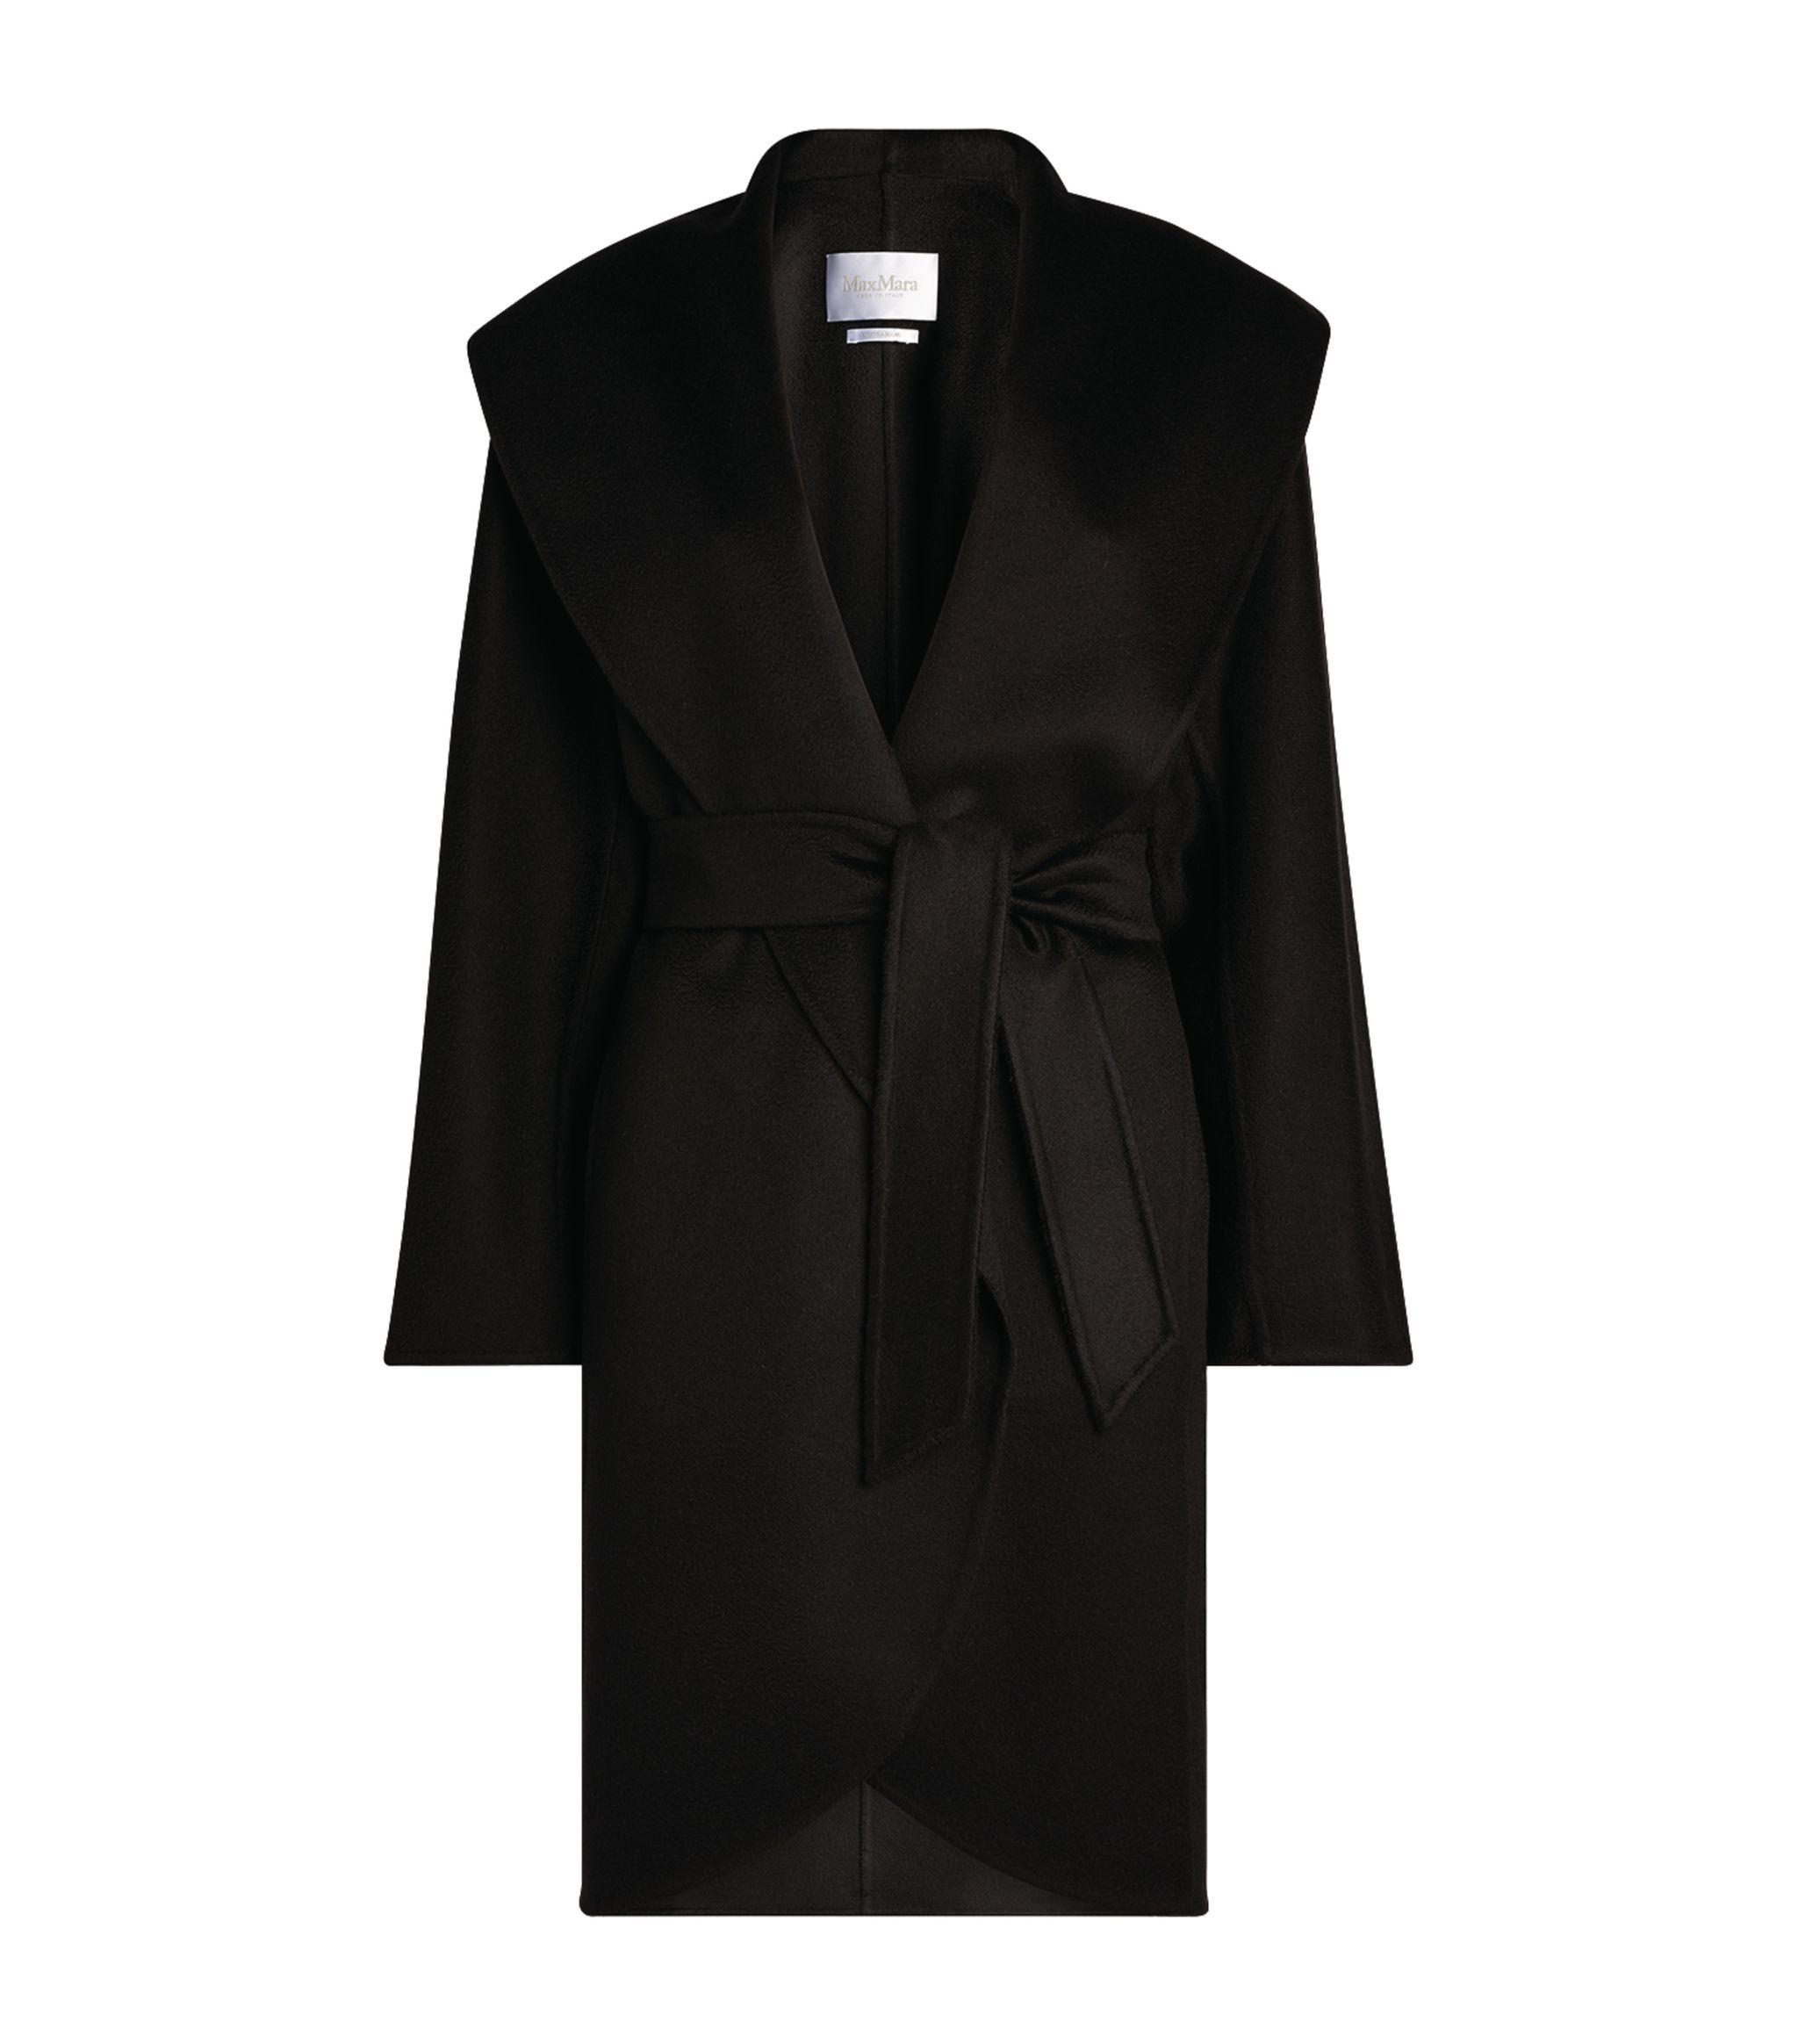 Max Mara Galles Cashmere Belted Coat in Black - Lyst